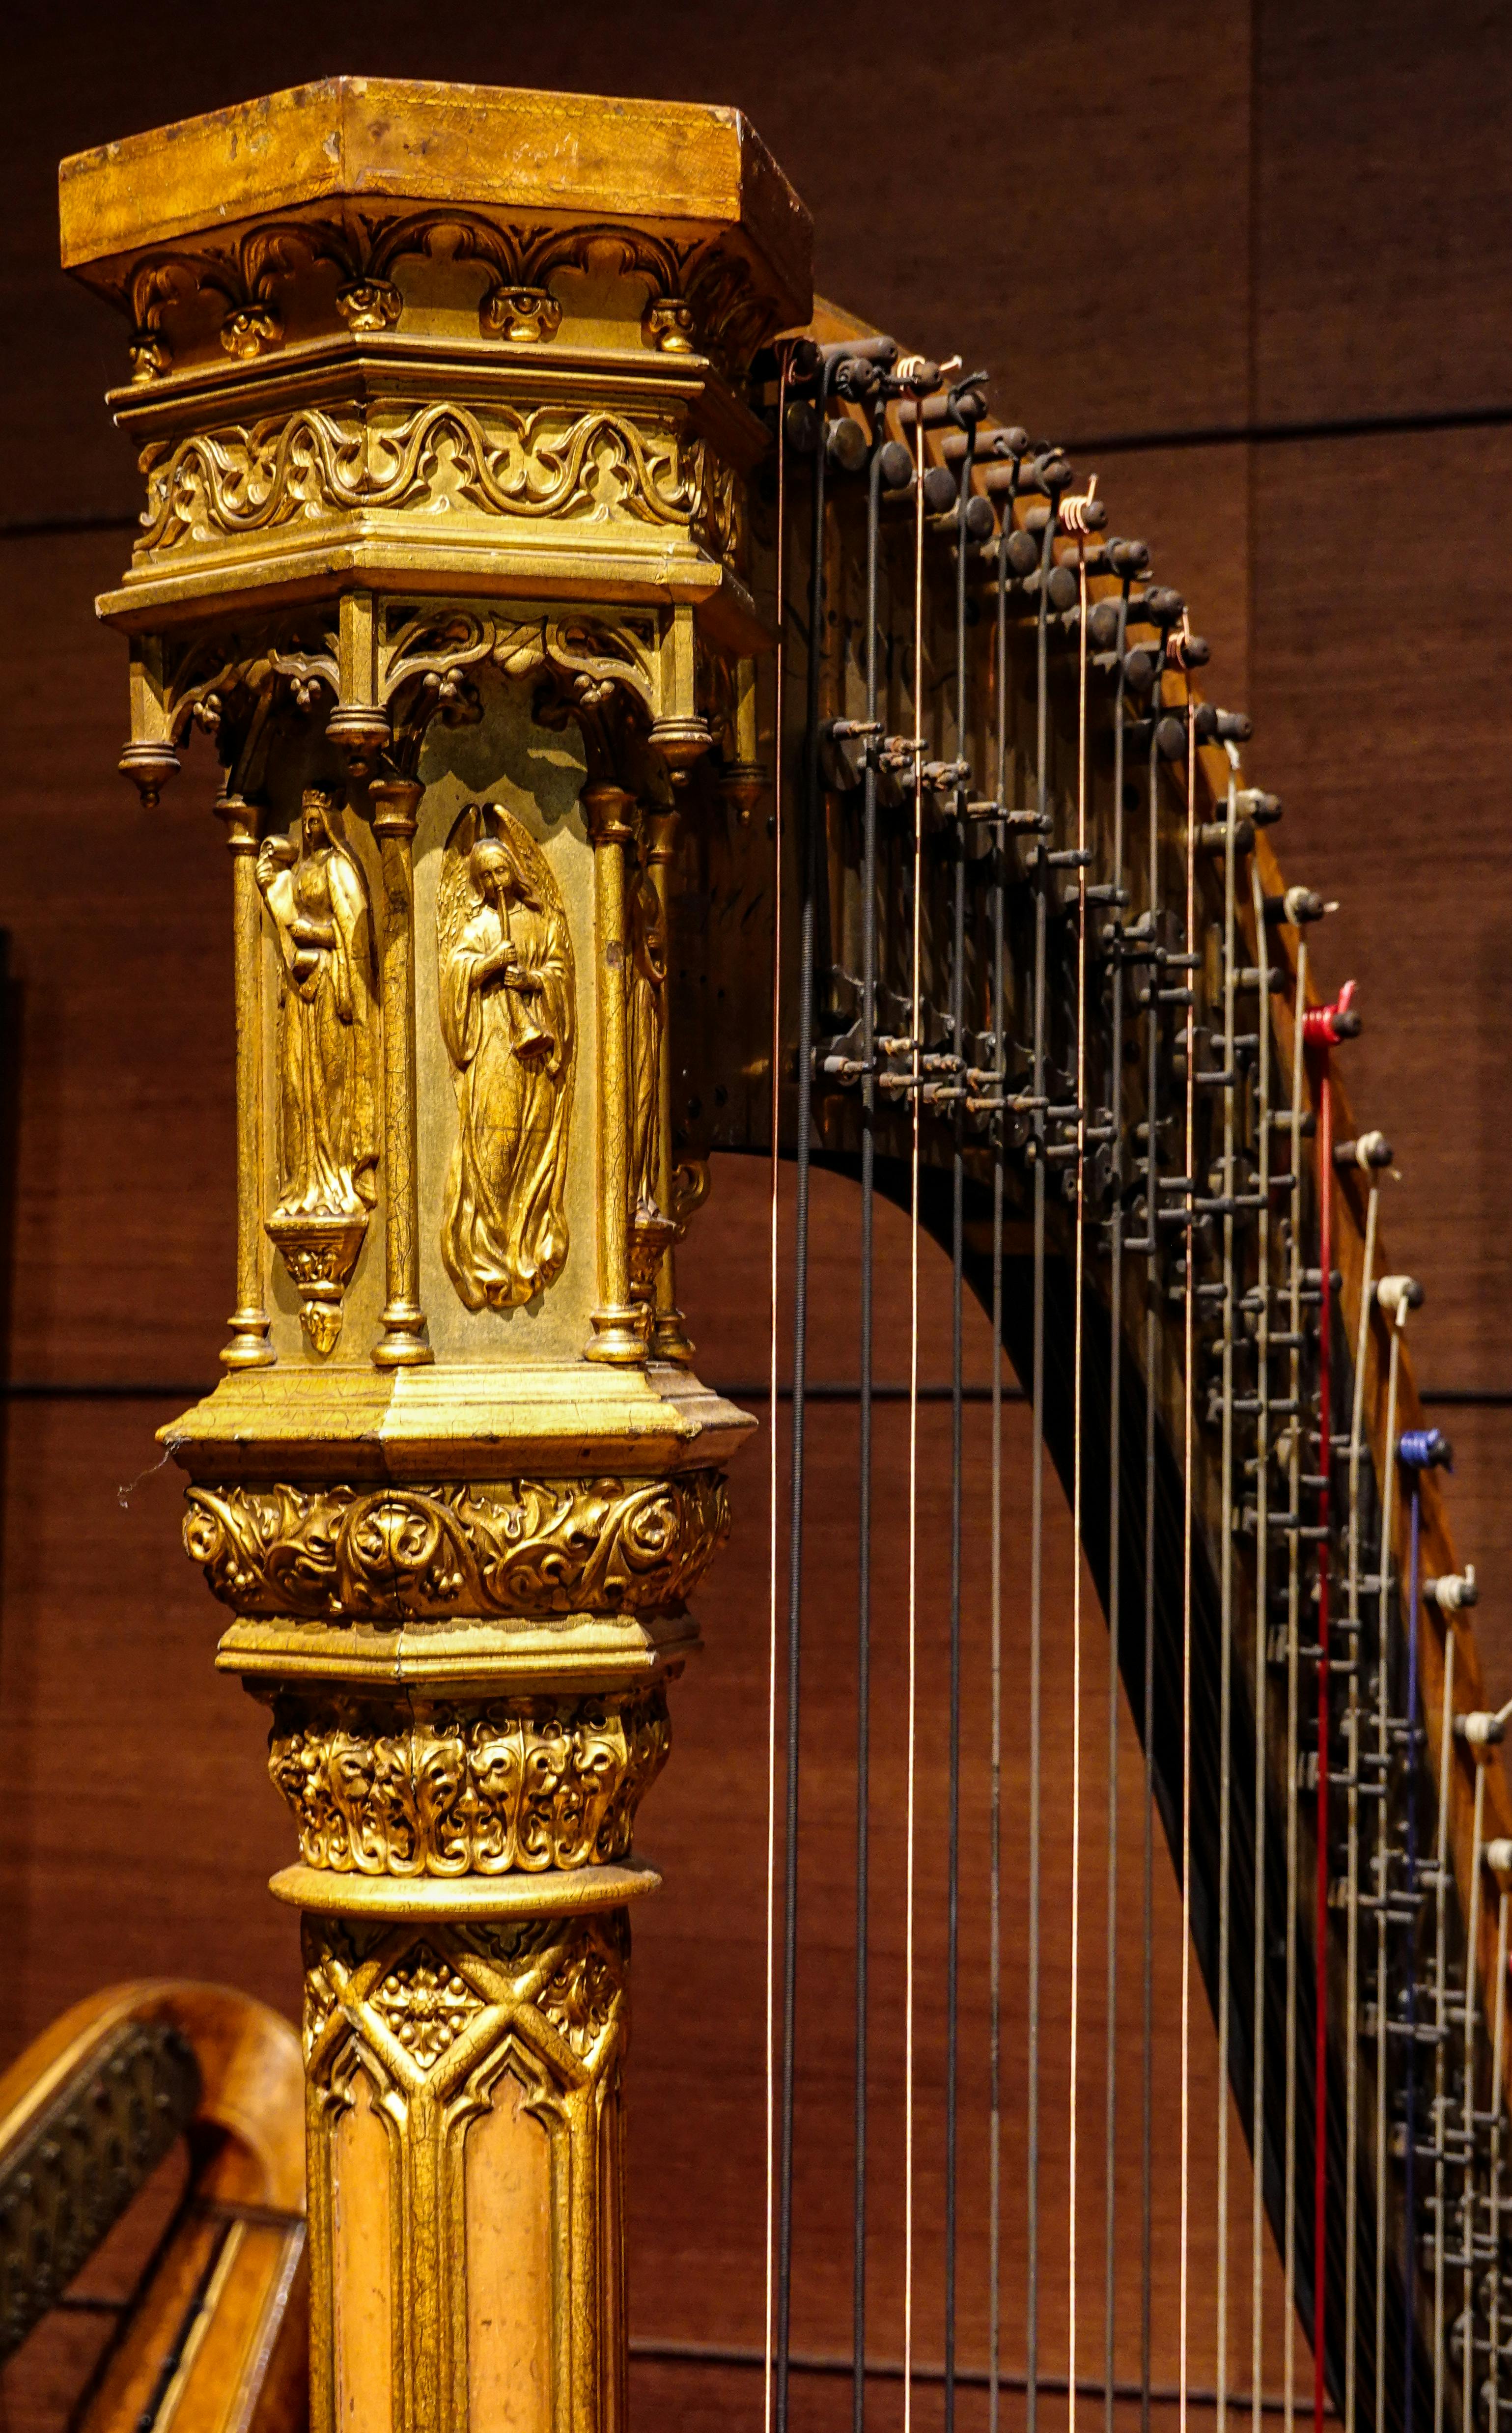 close up of a harp with gold carved details